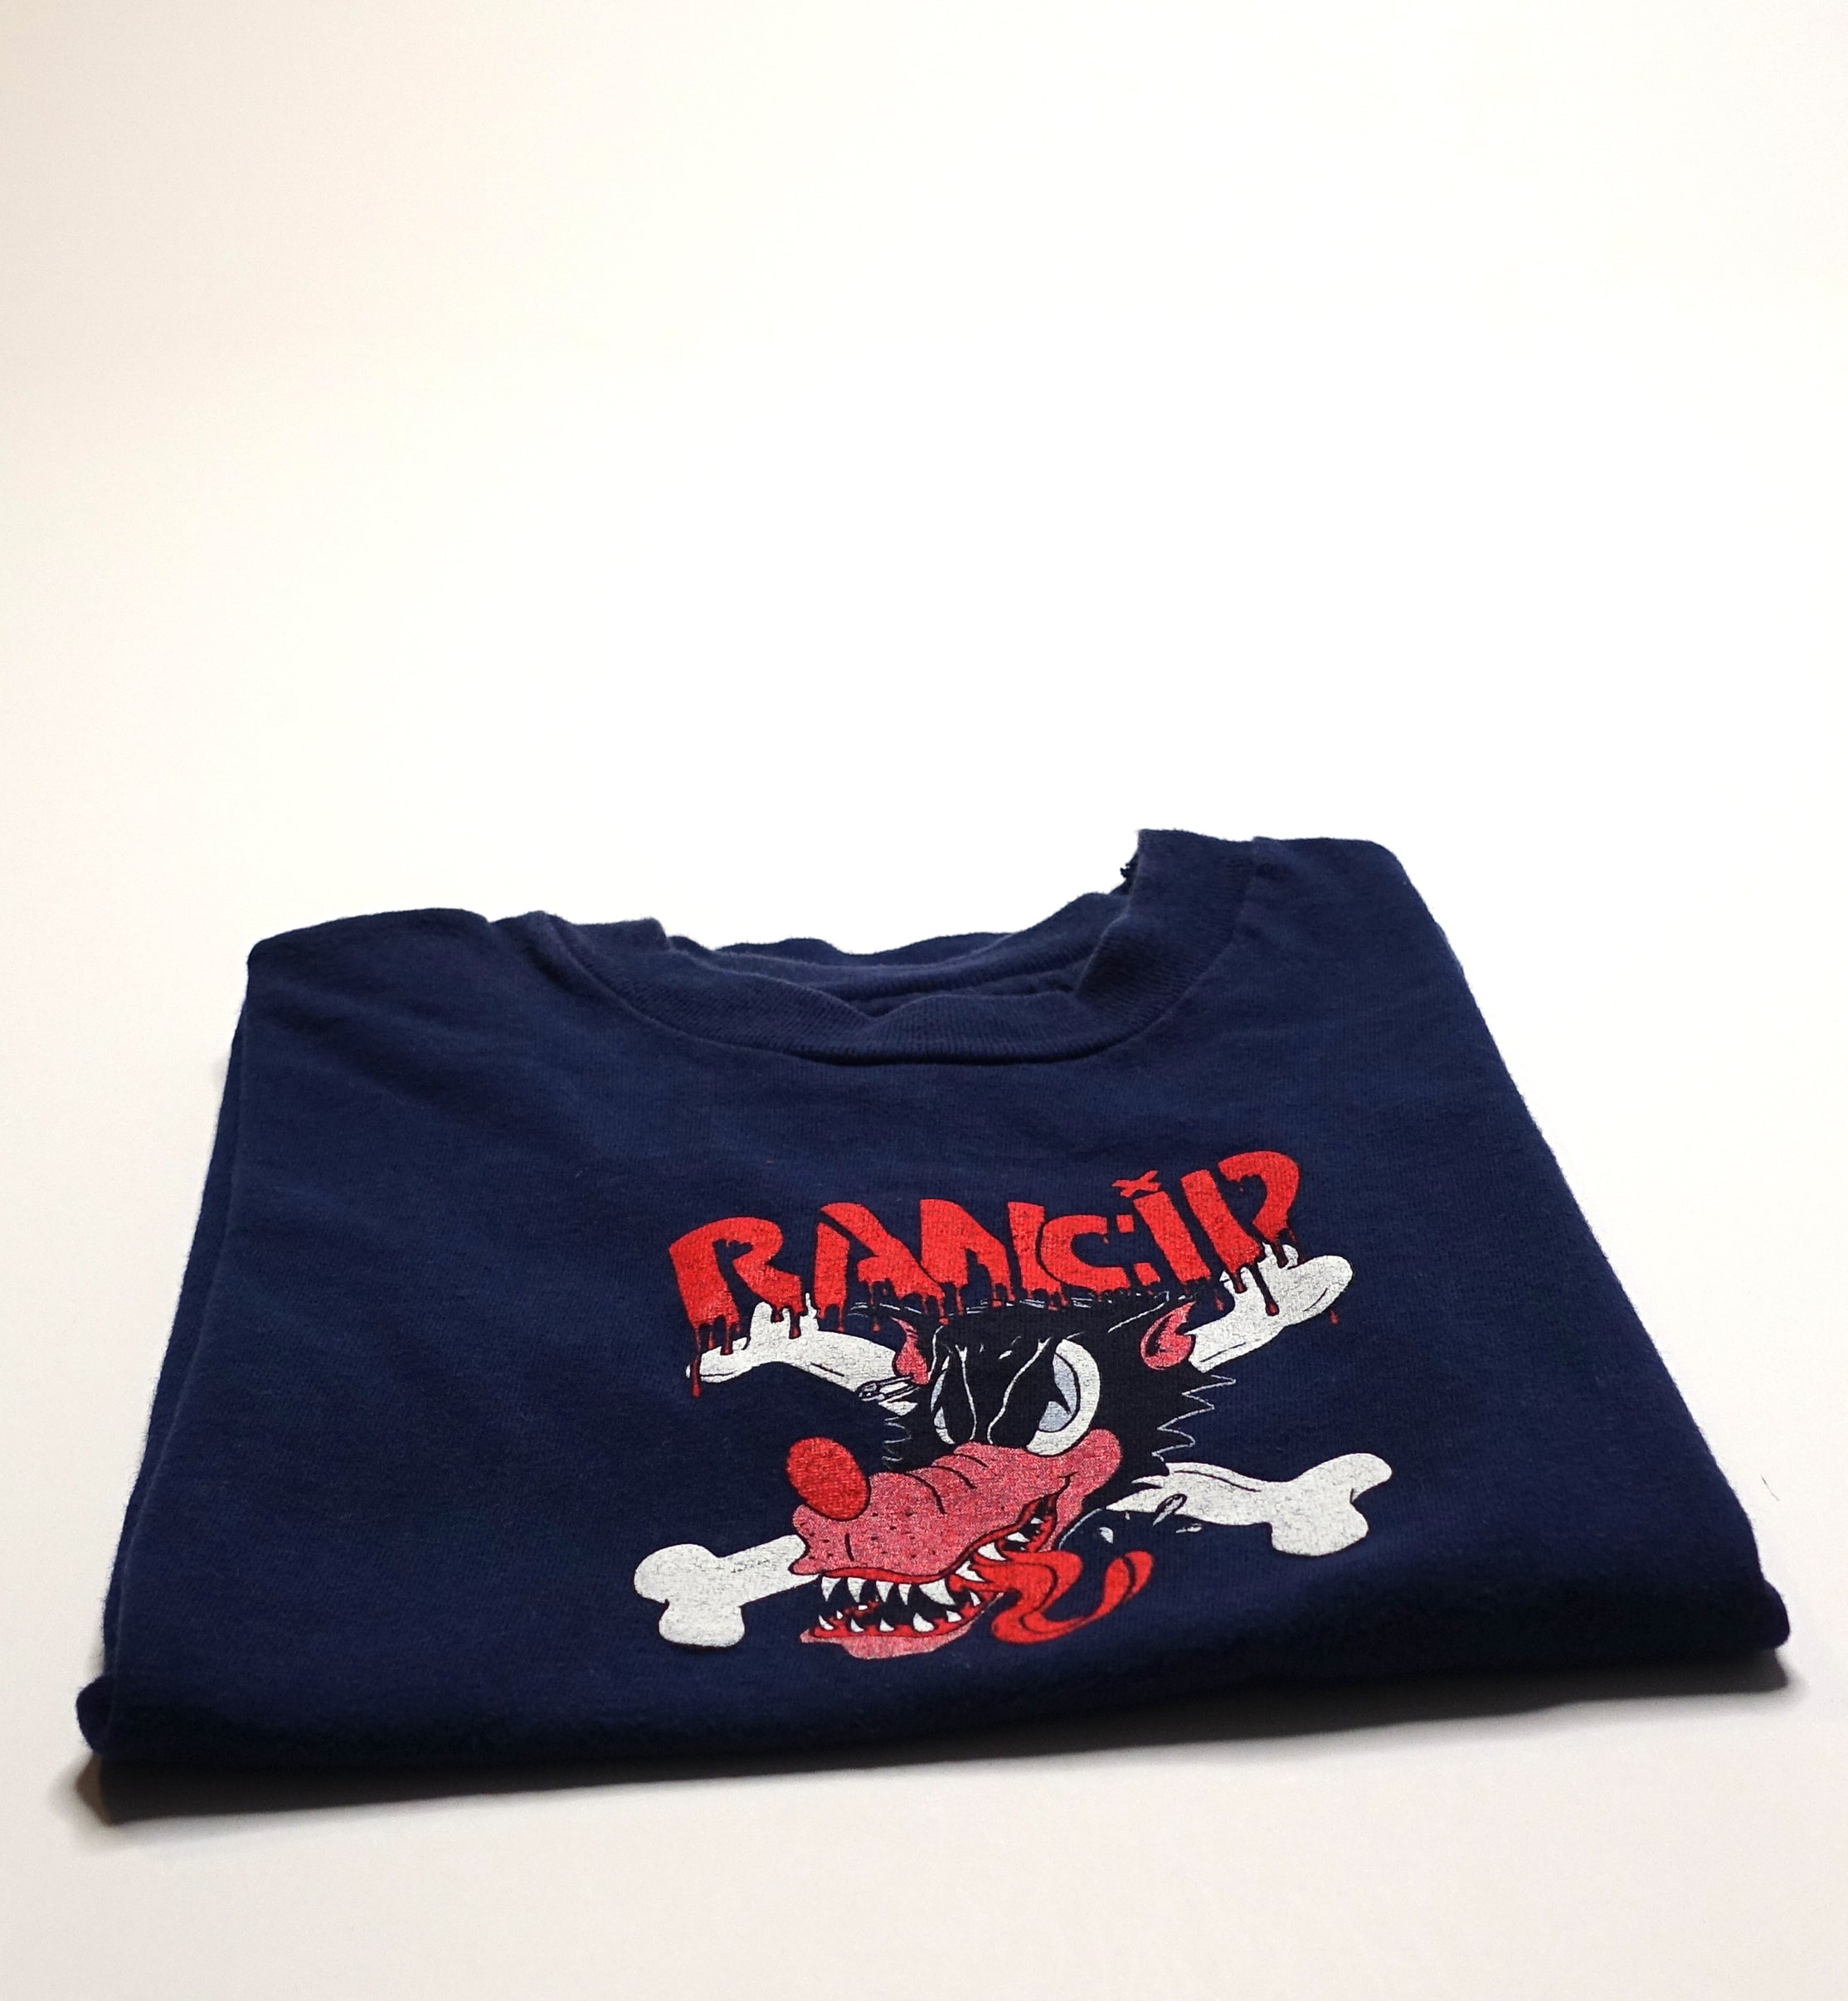 Rancid ‎– Wolf And Crossbones Tour Shirt Size Small / YM